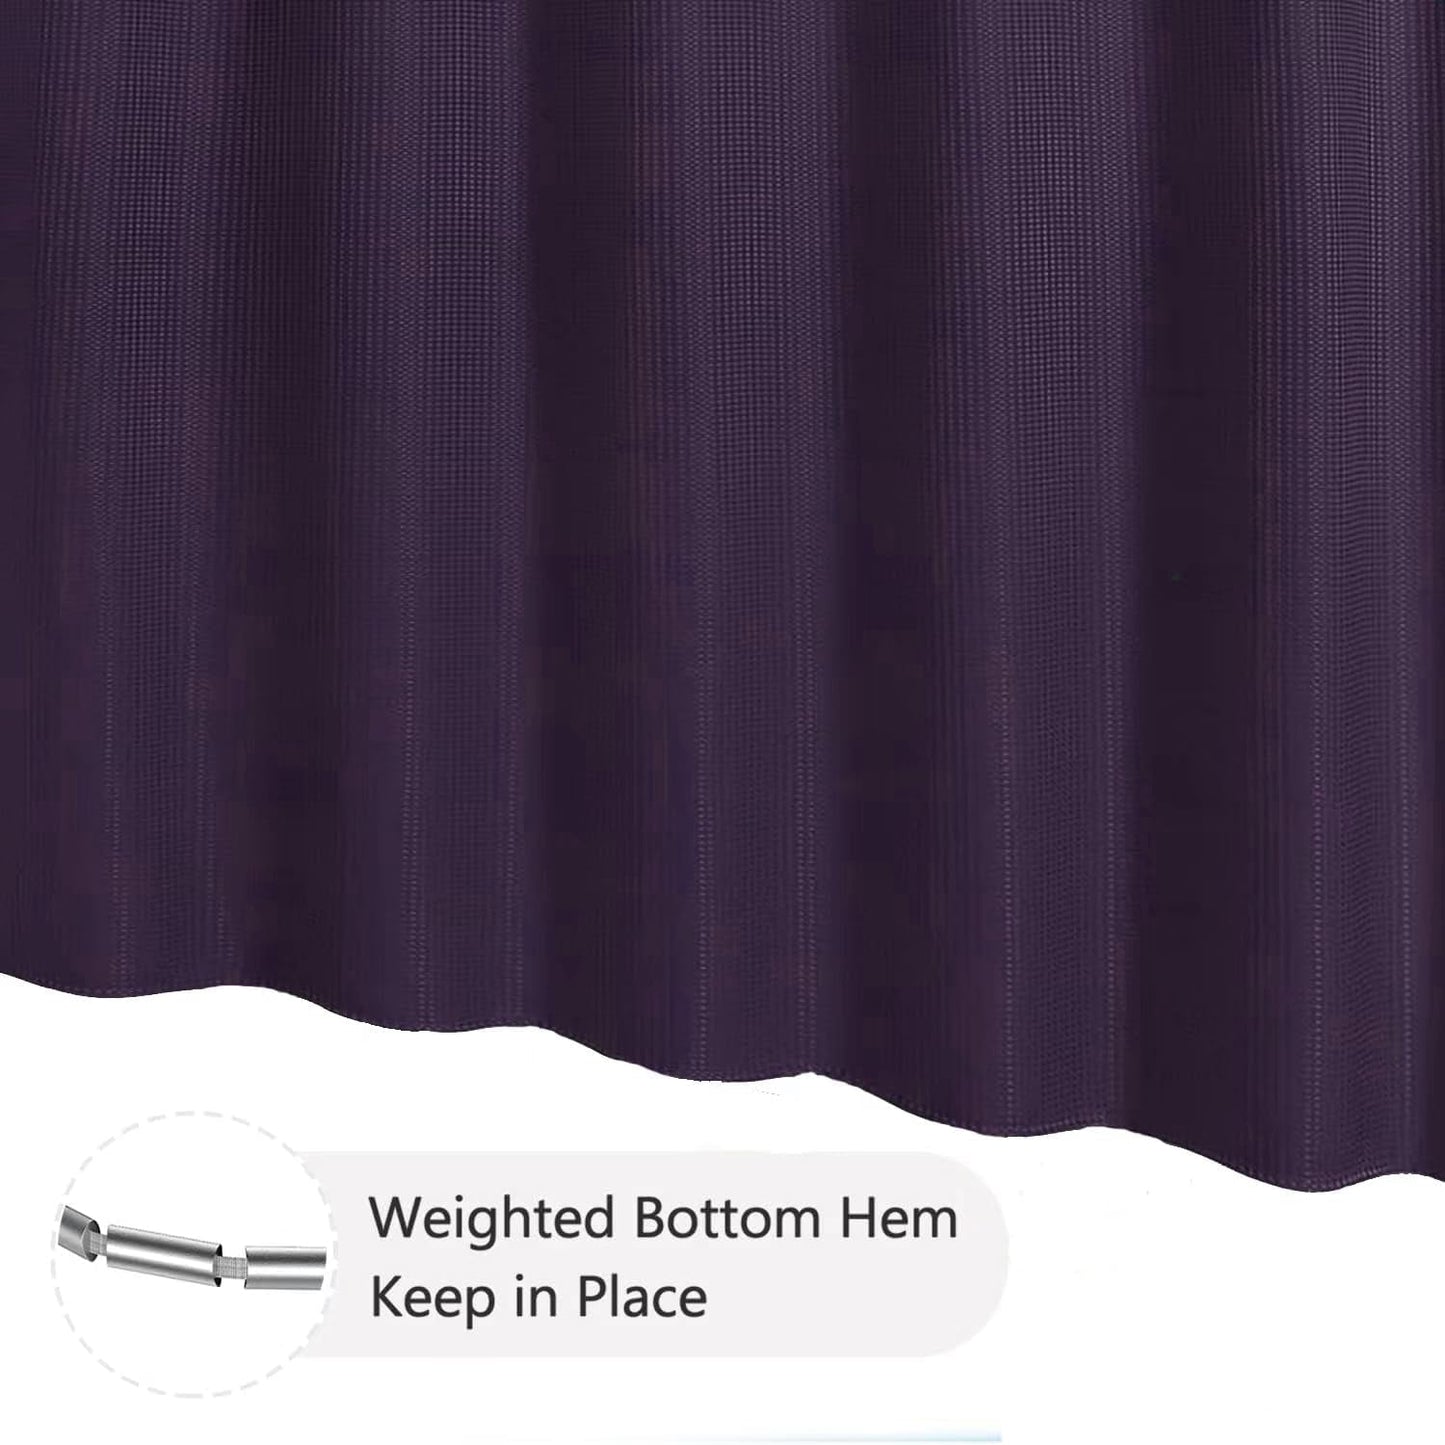 Purple Waffle Weave Shower Curtain - Fabric Shower Curtains for Bathroom,Soft Cloth & Hotel Quality, Rust Resistant Grommets Weighted Bottom Hem, 72Wx72H (Purple)